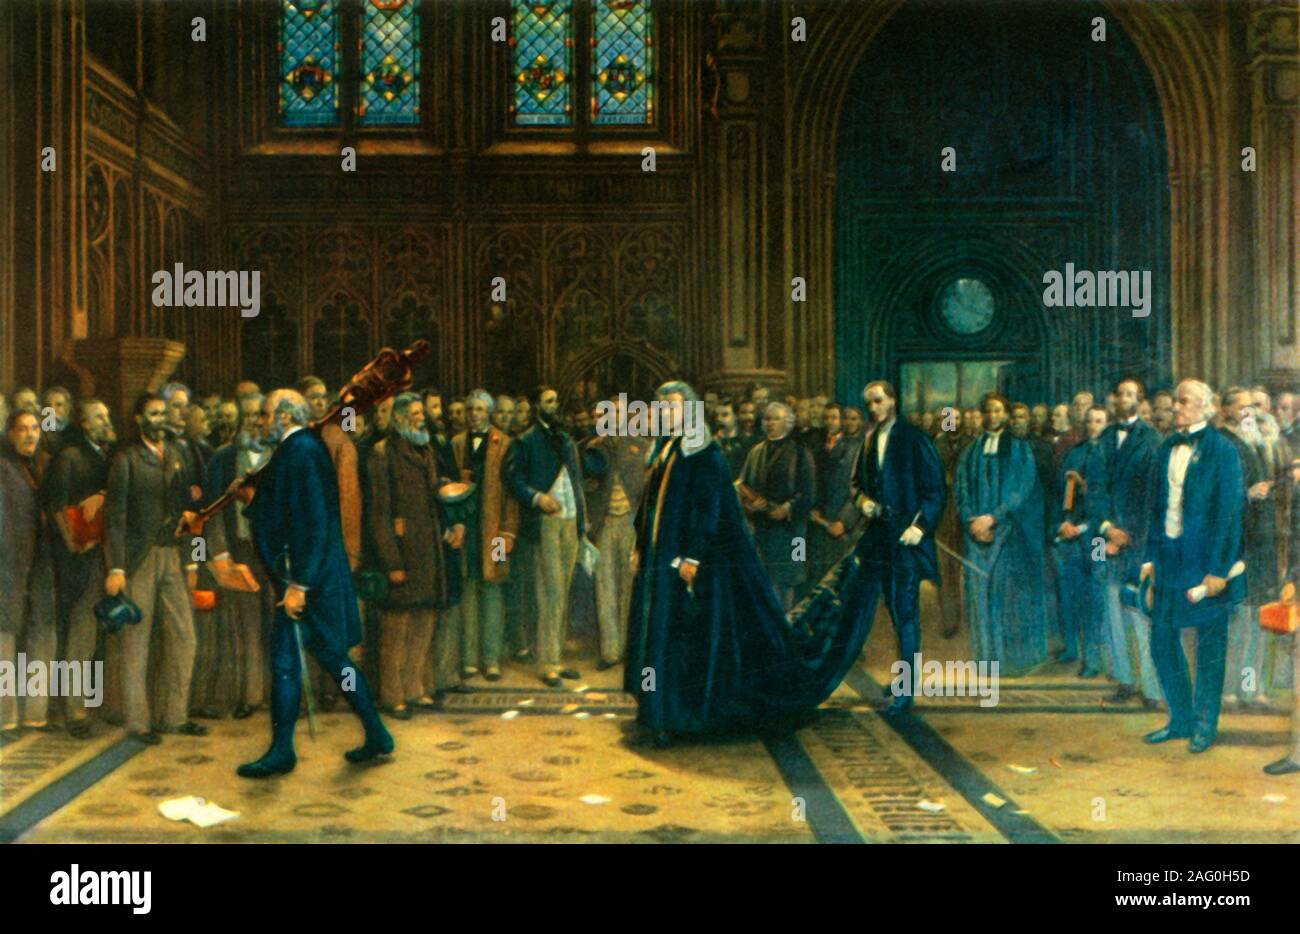 'The Speaker's Procession, 1884', (1947). Members of Parliament inside the Palace of Westminster in London. The Speaker is Henry Bouverie William Brand. The Prime Minister William Ewart Gladstone is on the right. From &quot;The House of Commons&quot;, by Martin Lindsay M.P. [Collins, London, 1947] Stock Photo